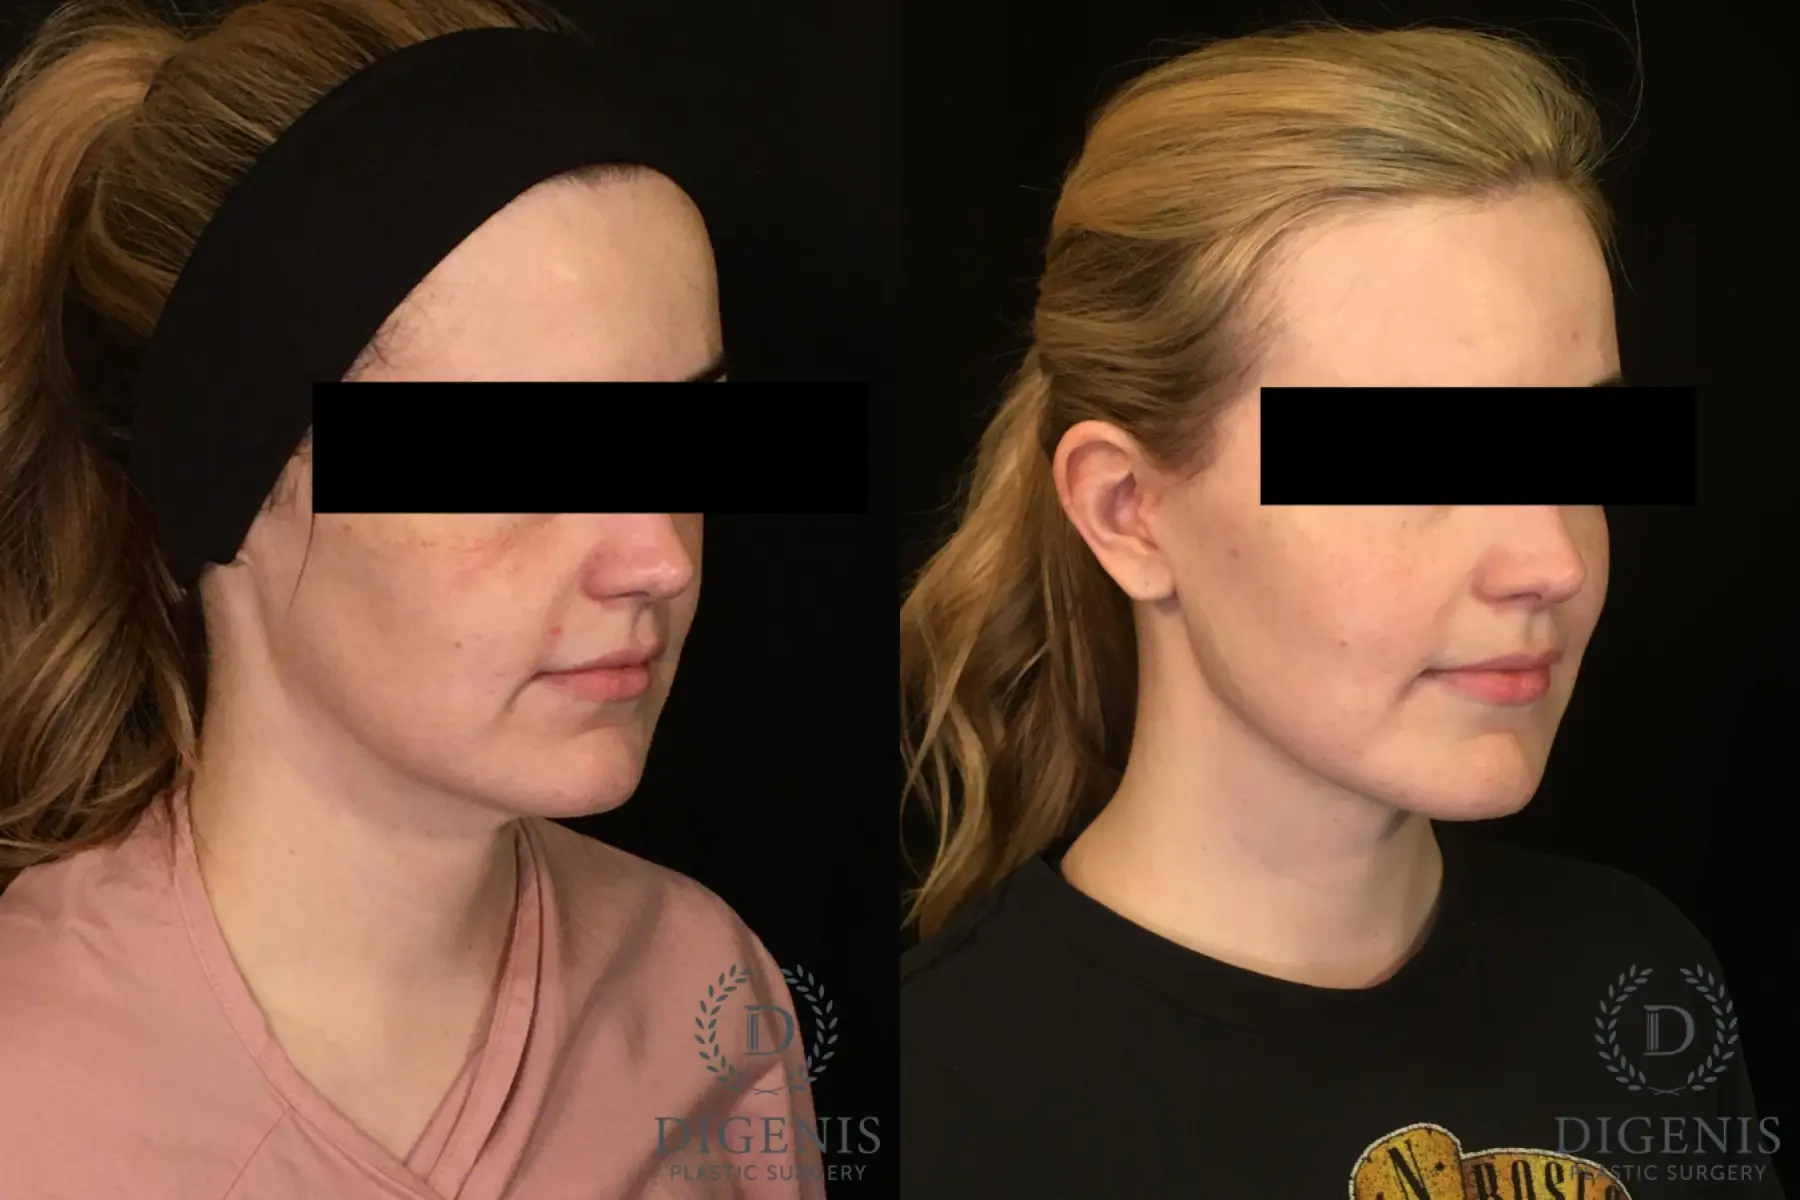 Digenis Refresh Lift: Patient 2 - Before and After 4